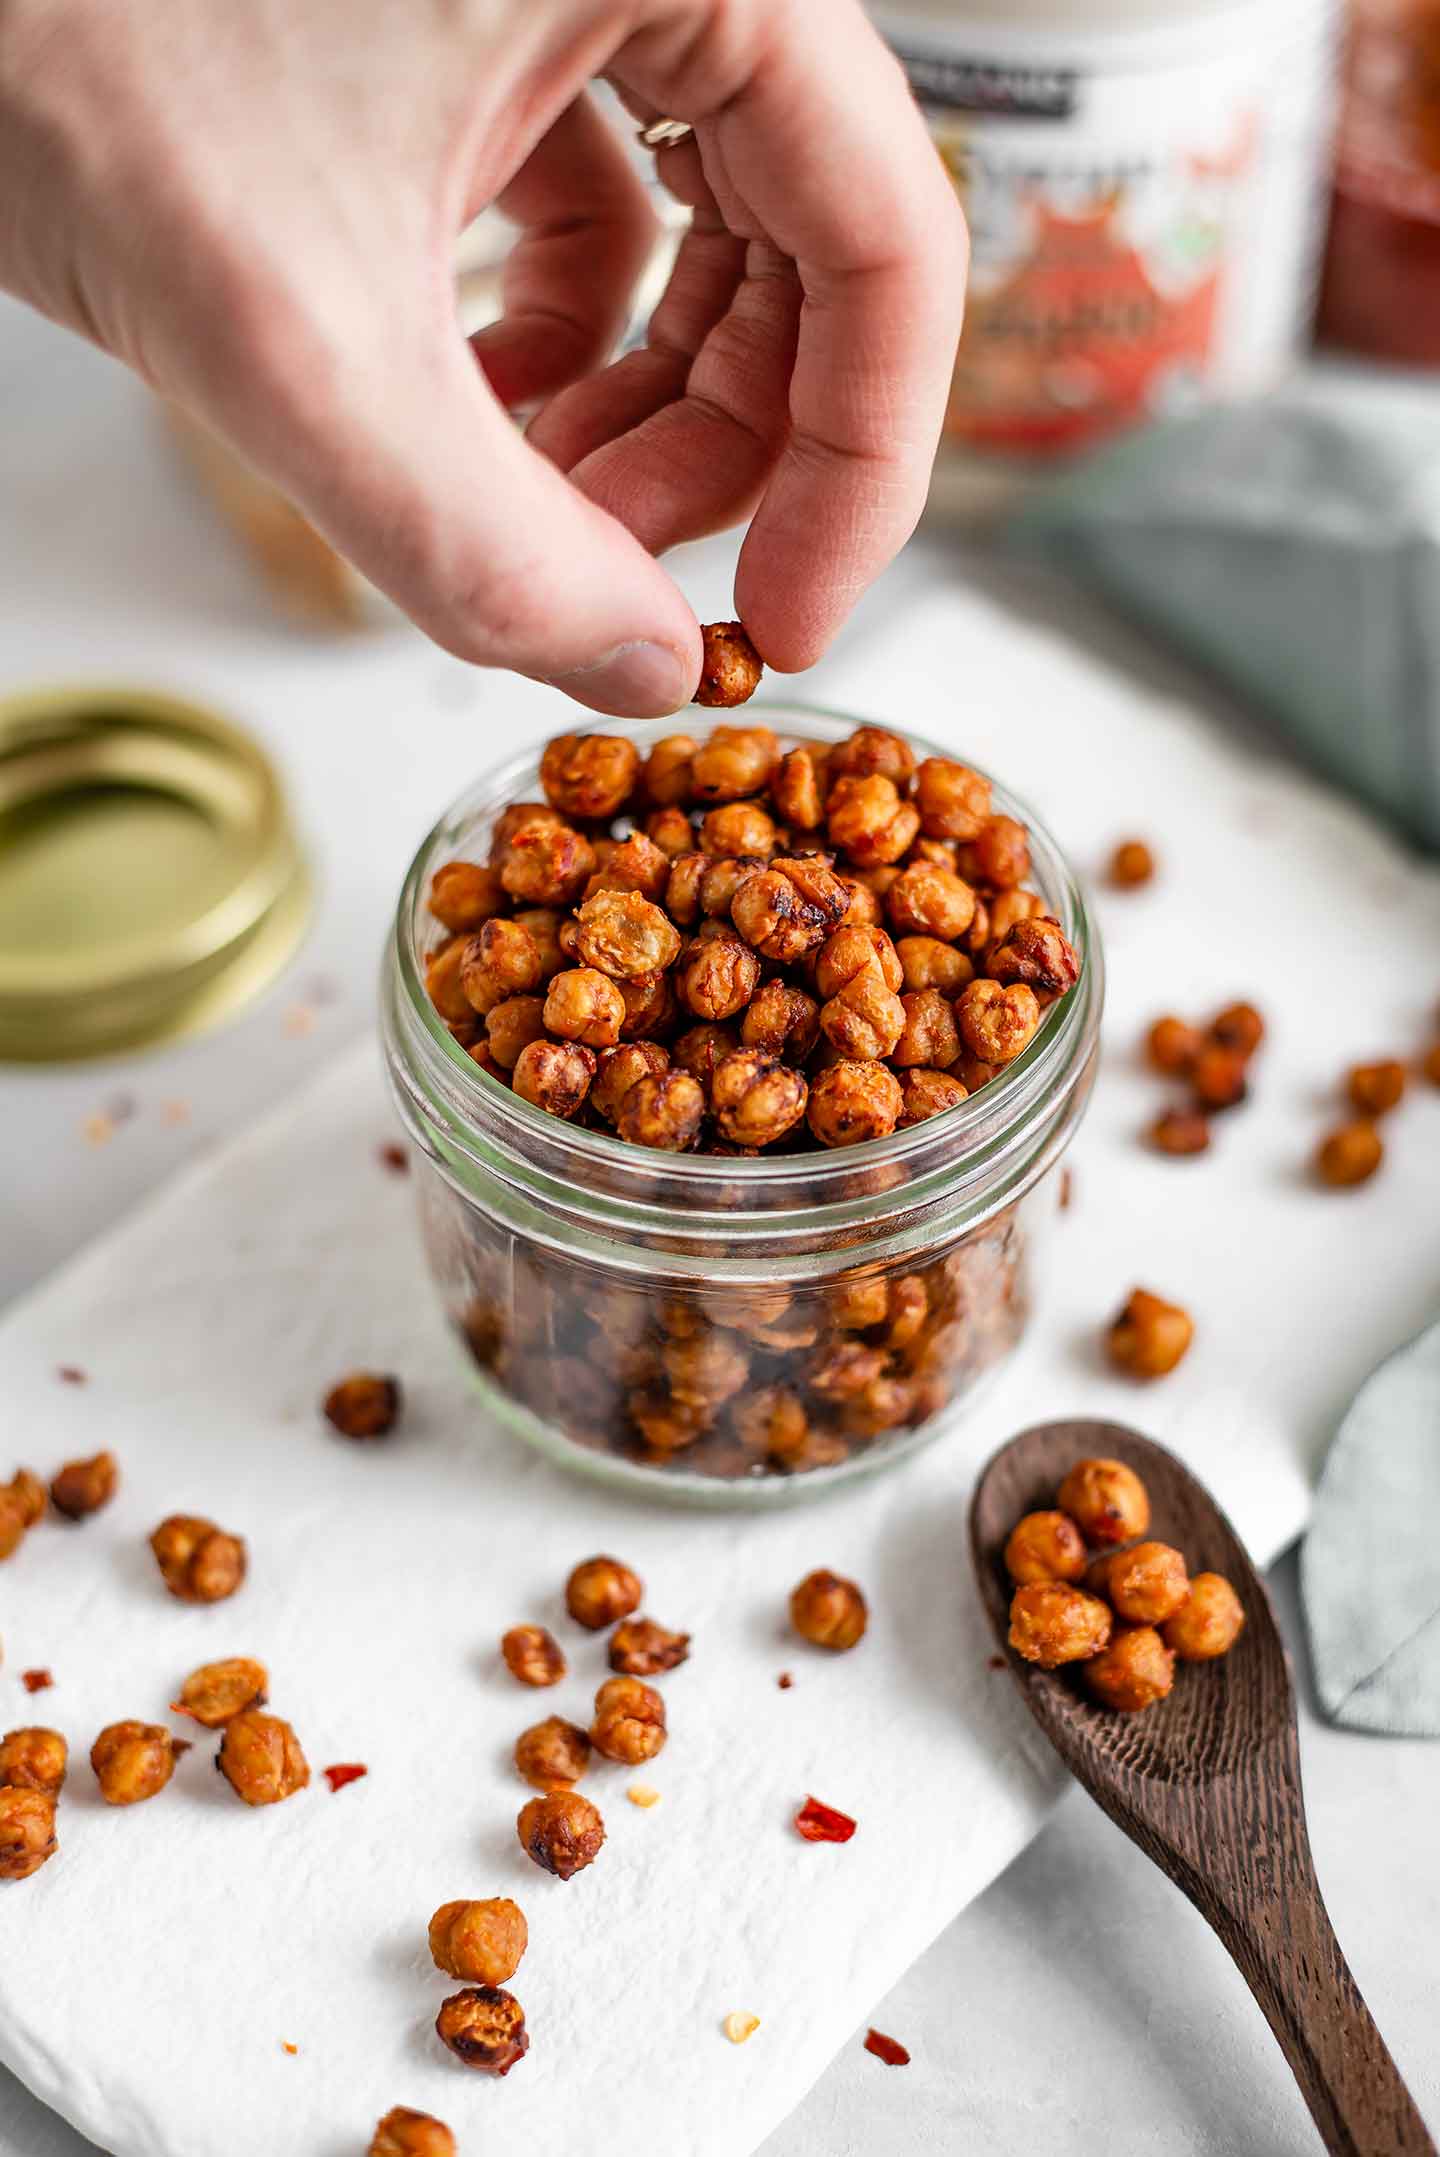 Side view of hand picking up a roasted chickpea from a jar of the tasty snack.